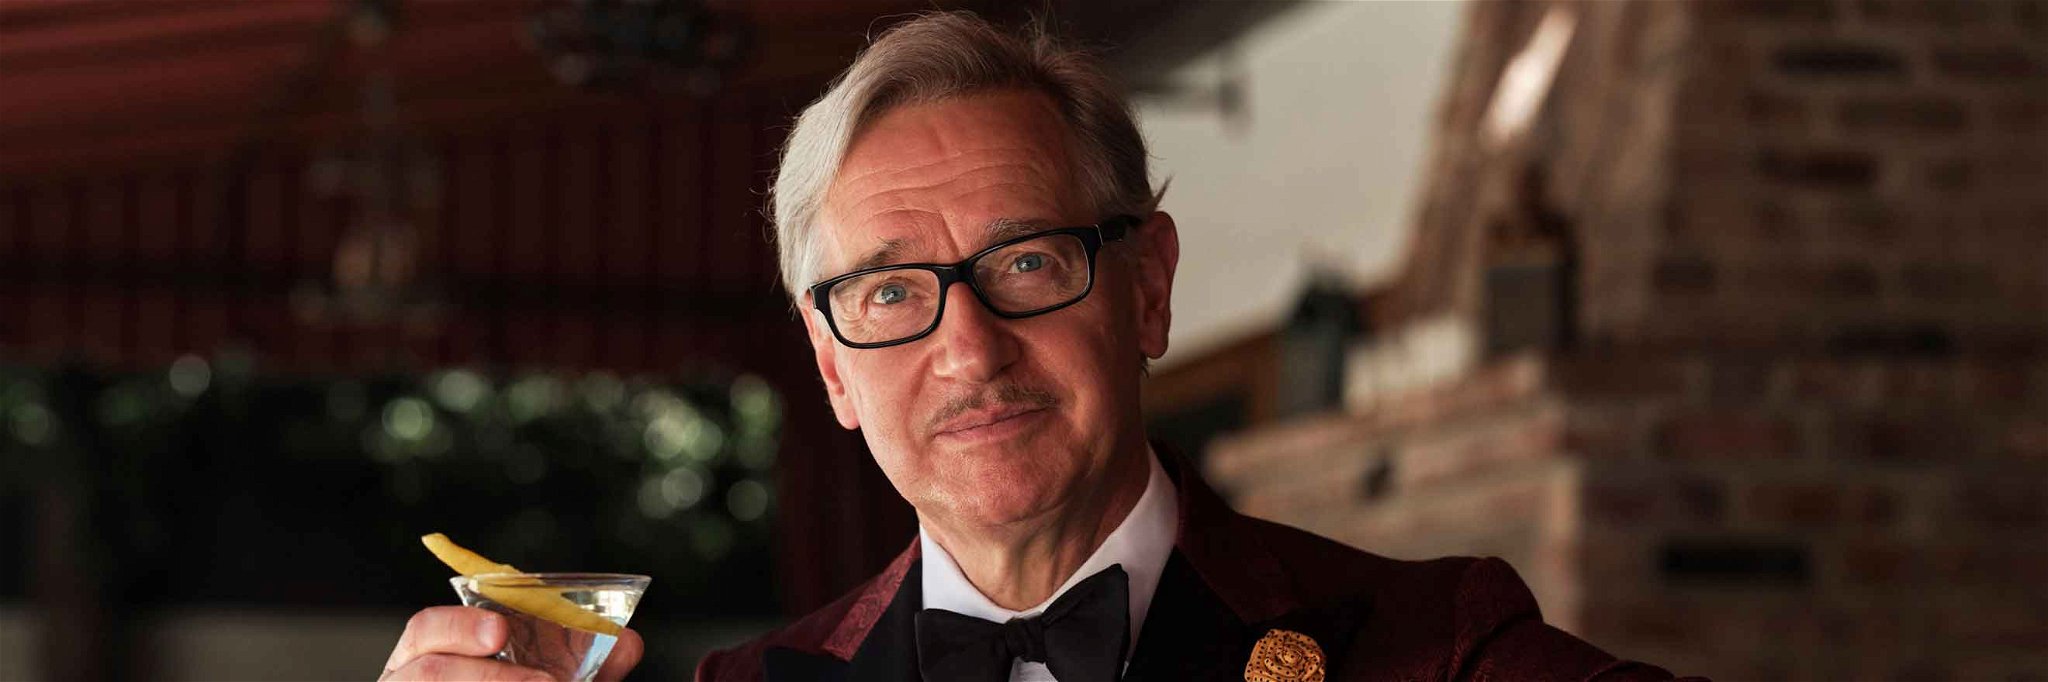 Paul Feig in cocktail mood